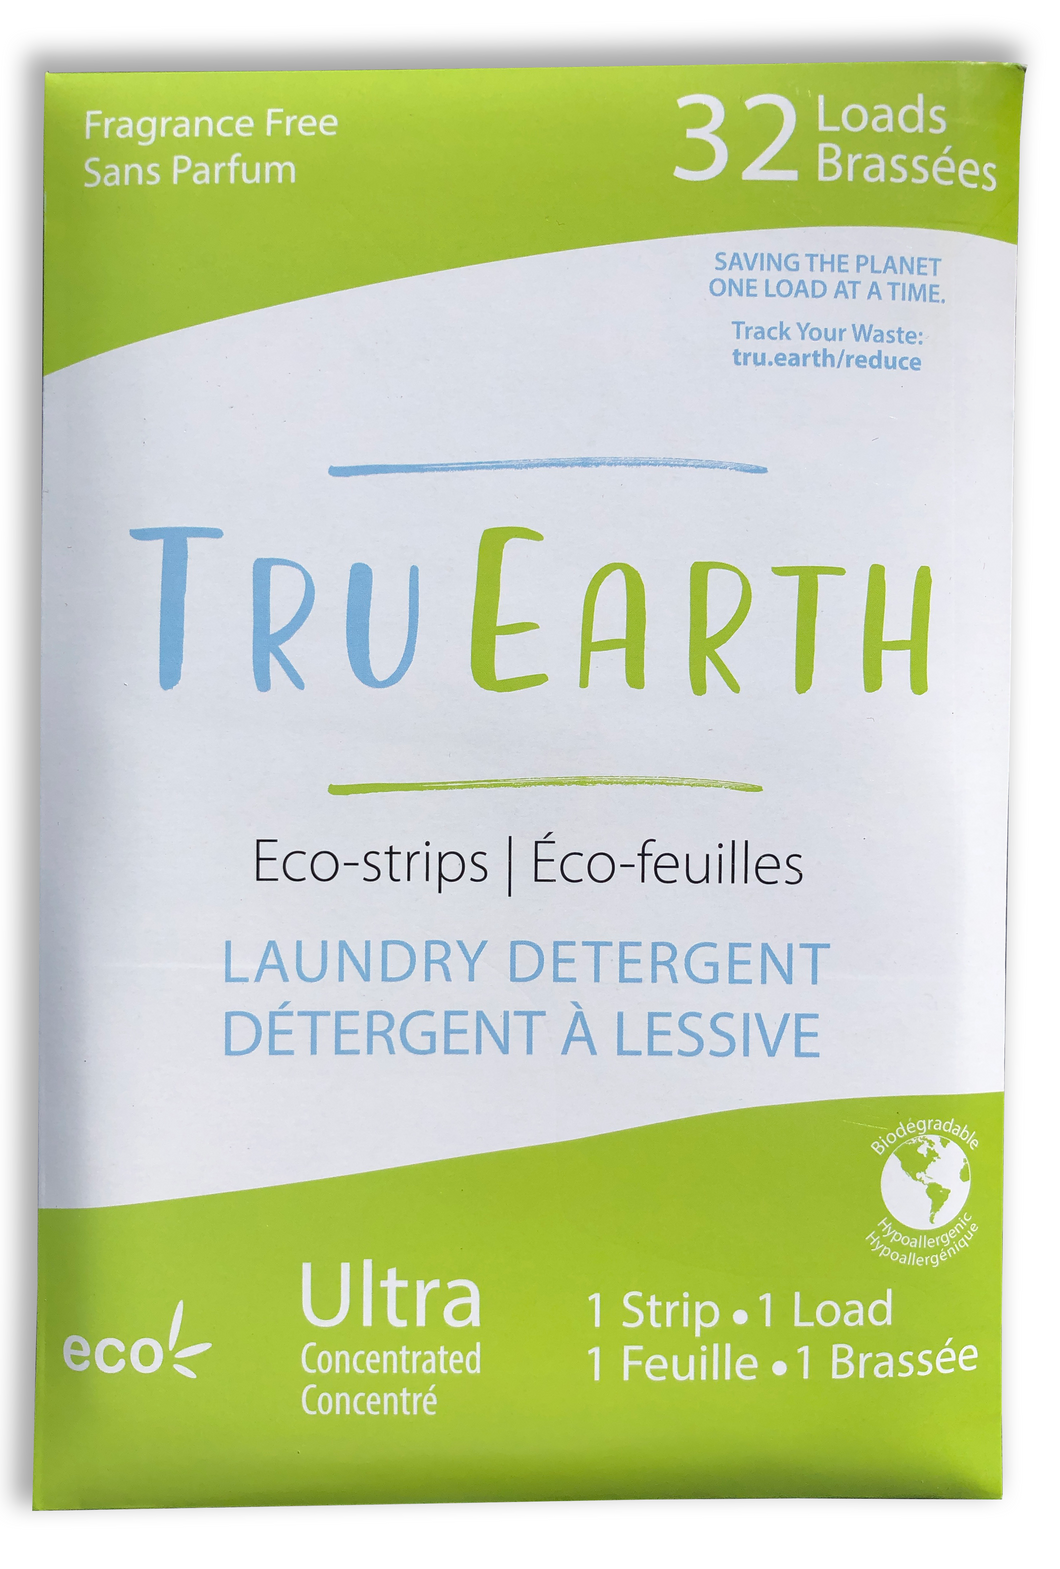 Eco-strips Laundry Detergent (Fragrance-free) - 32 Loads - Ecophant | laundry detergent bulk, best laundry detergent, environmentally friendly, eco-friendly, zero waste laundry detergent, laundry detergent sheets, laundry detergent